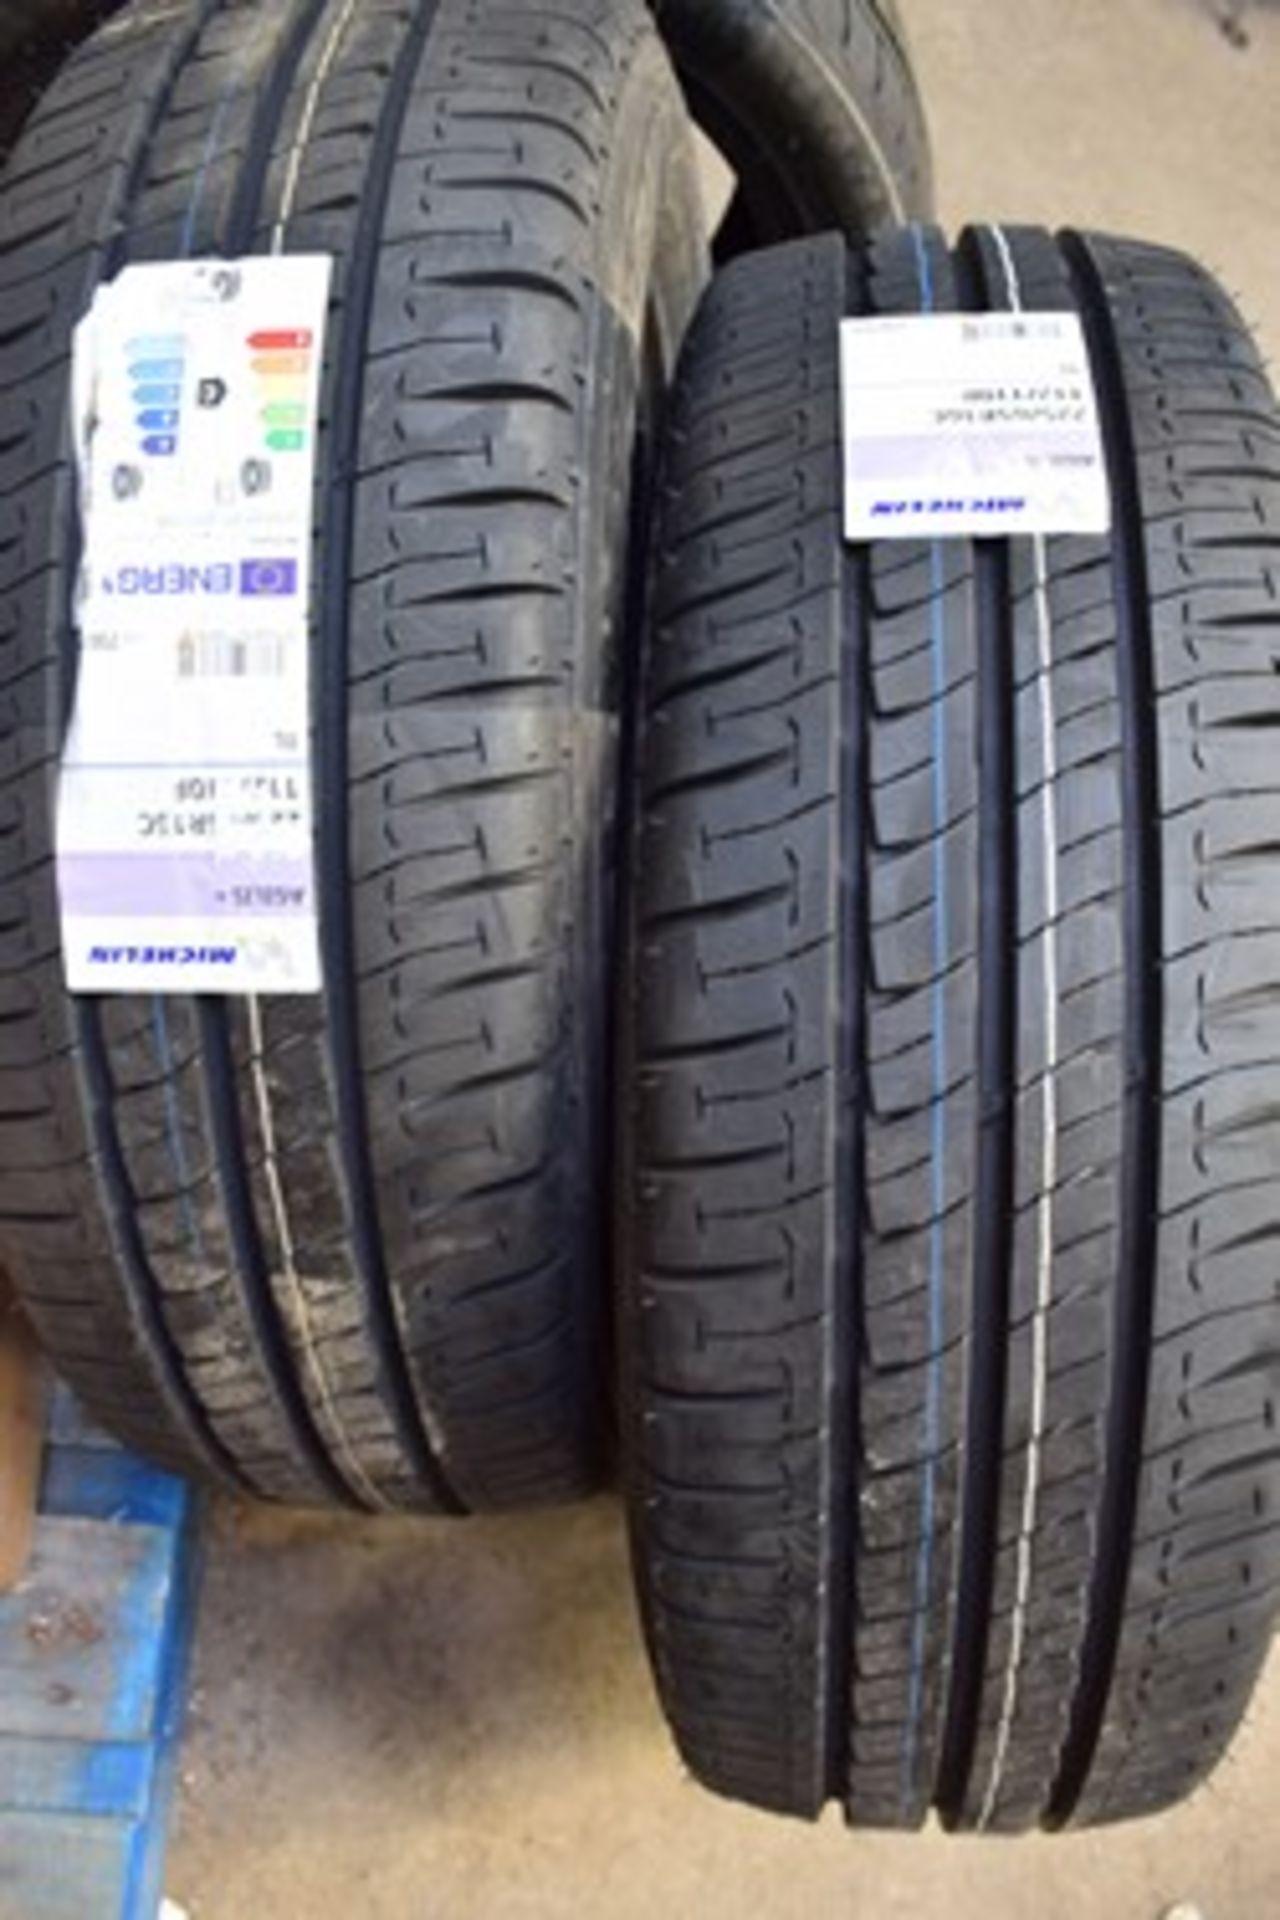 1 x pair of Michelin Agilis + tyres, size 225/65R16C 112/110R TL - circle mark to one tyre - New